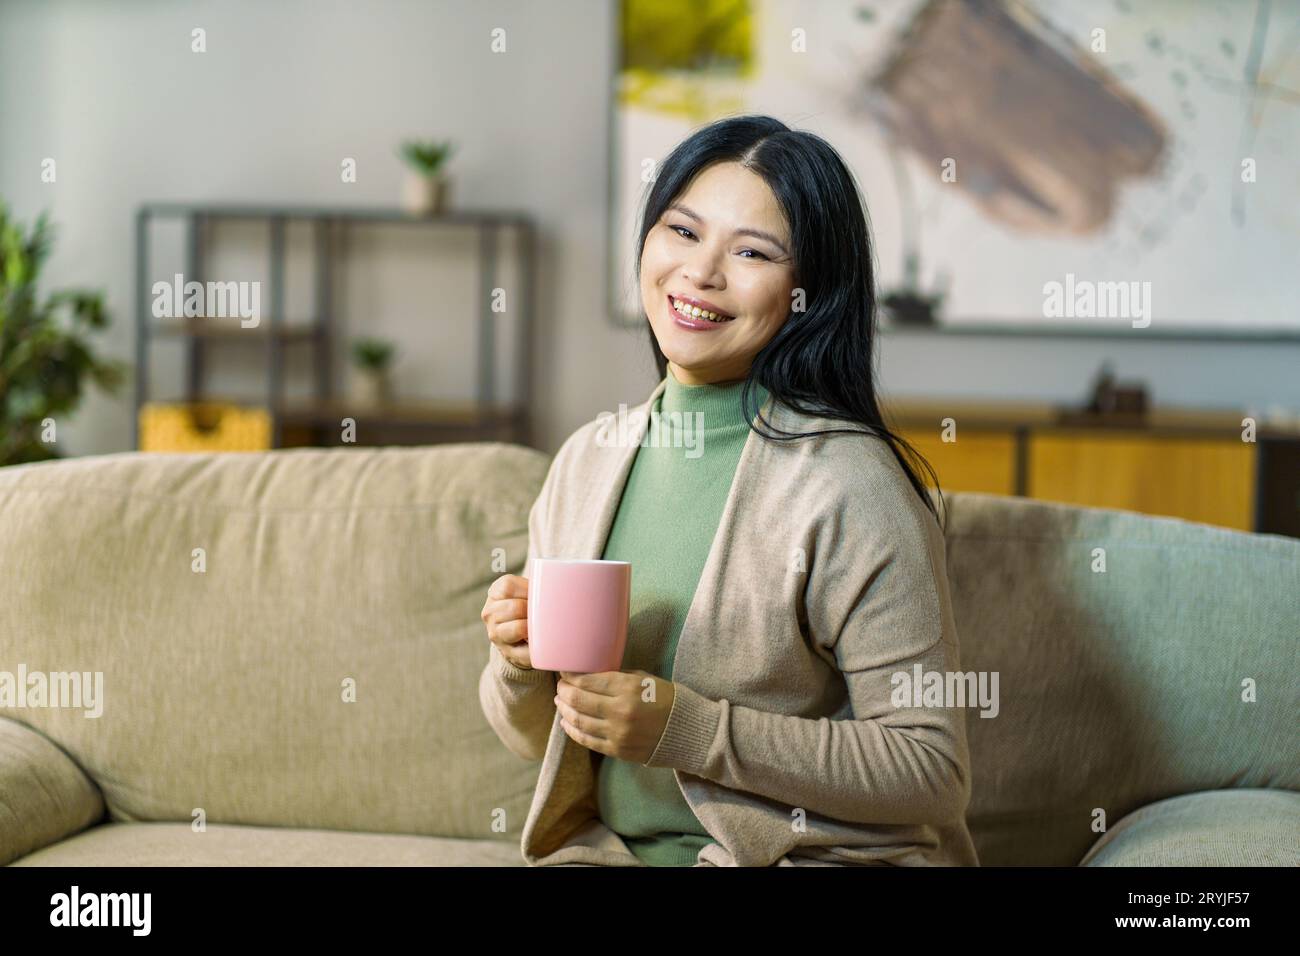 Mature Asian woman enjoys hot cup of tea while relaxing on her cozy living room sofa Stock Photo